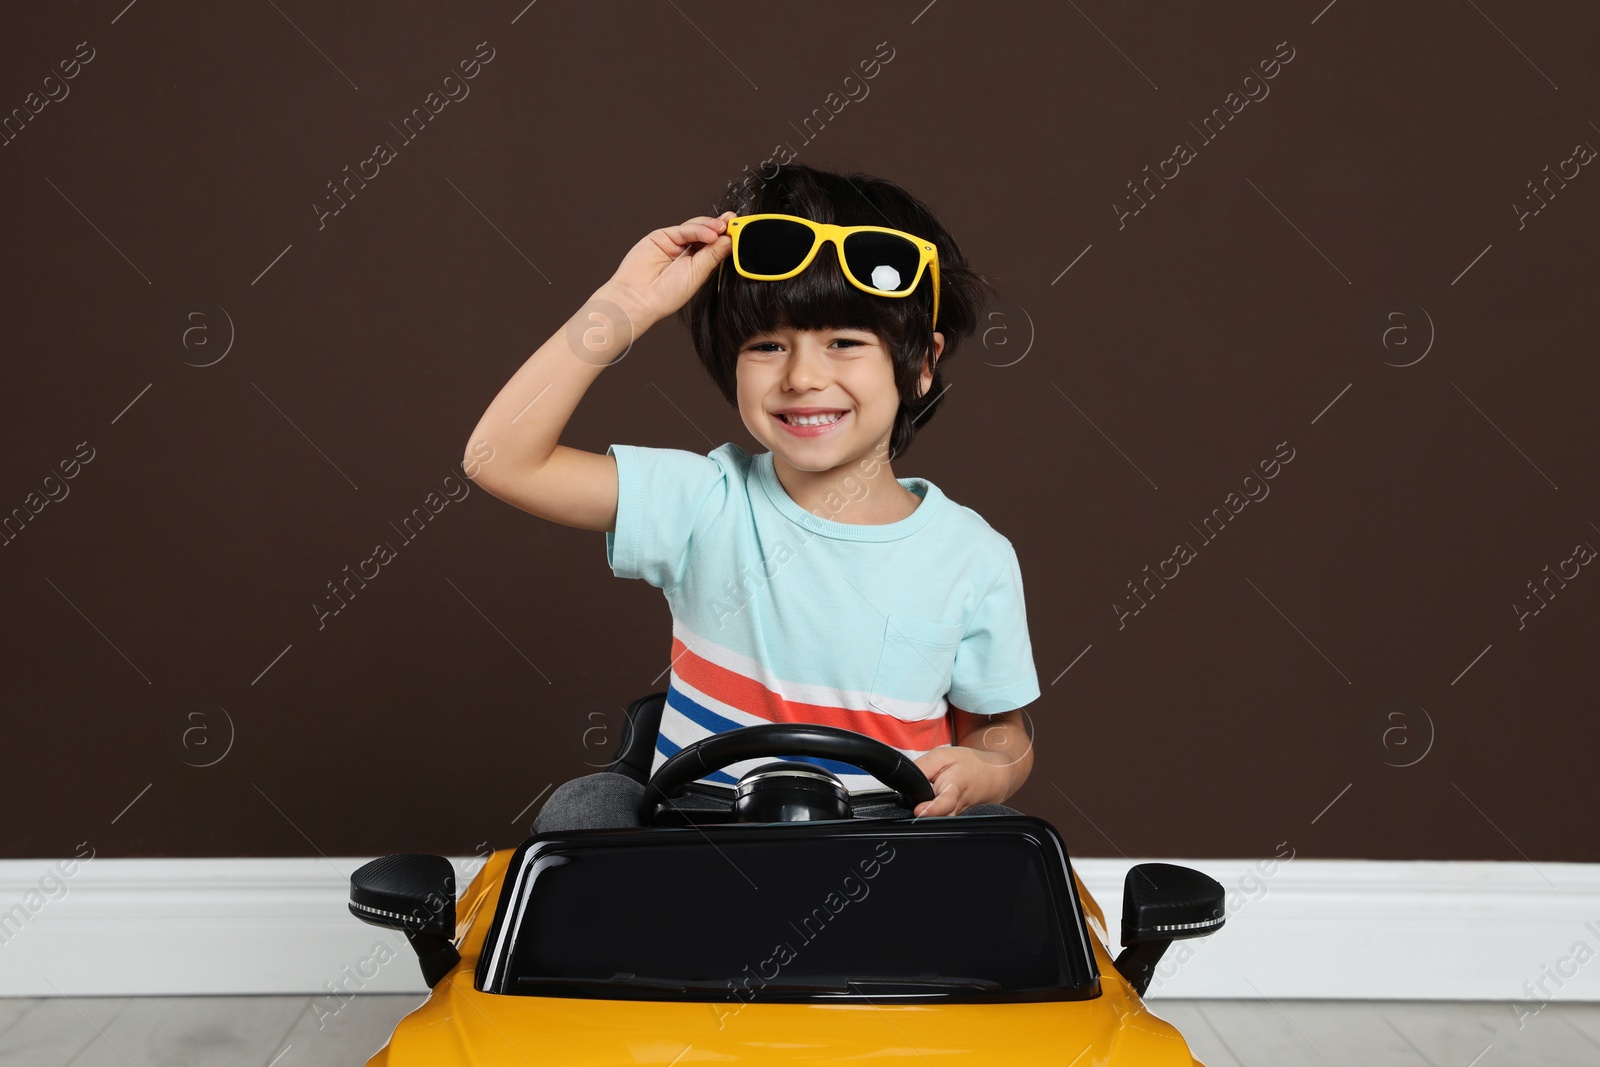 Photo of Cute little boy driving children's electric toy car near brown wall indoors